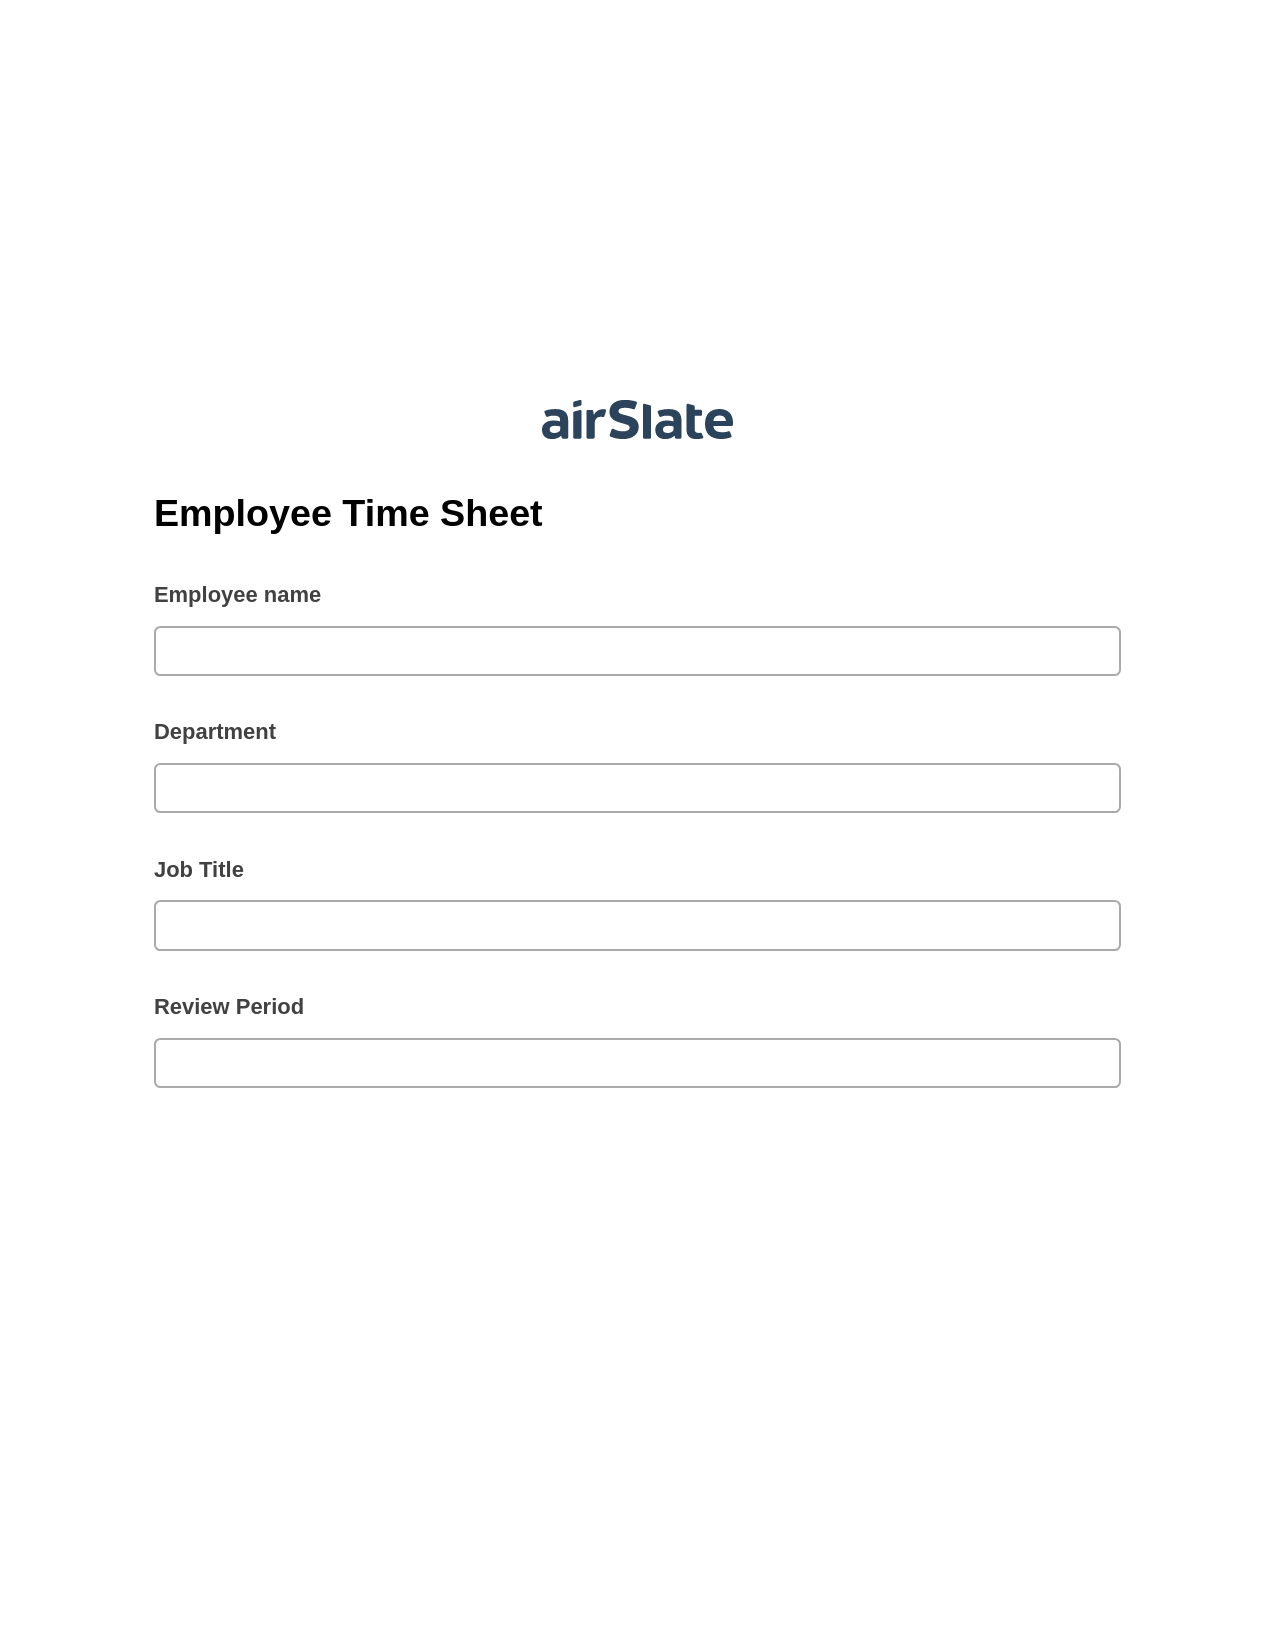 Employee Time Sheet Pre-fill from Litmos bot, Create slate addon, Archive to Dropbox Bot